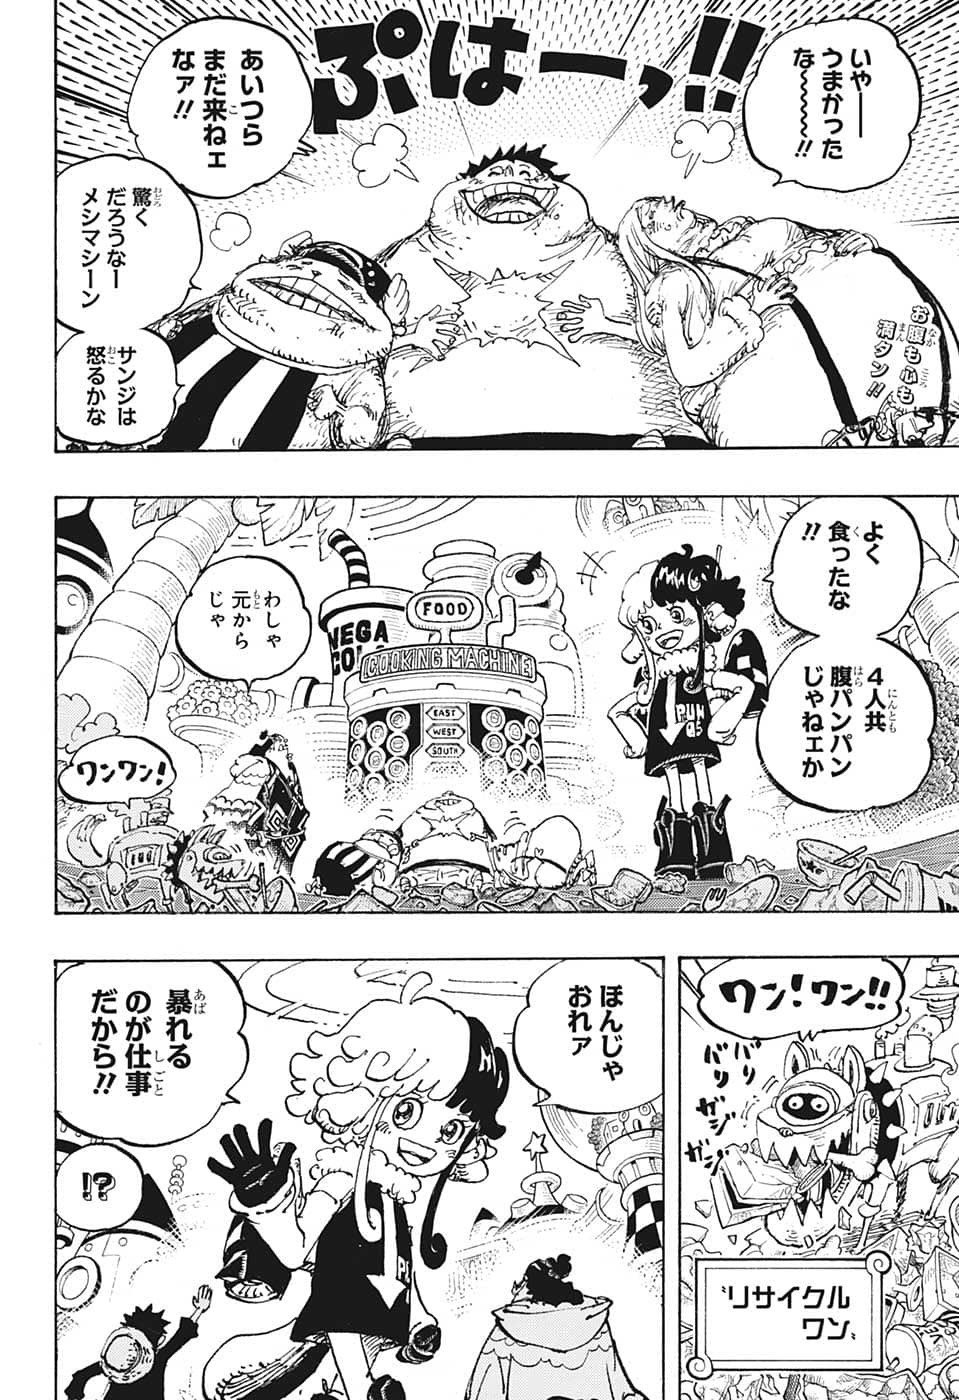 One Piece - Chapter 1063 - Page 3